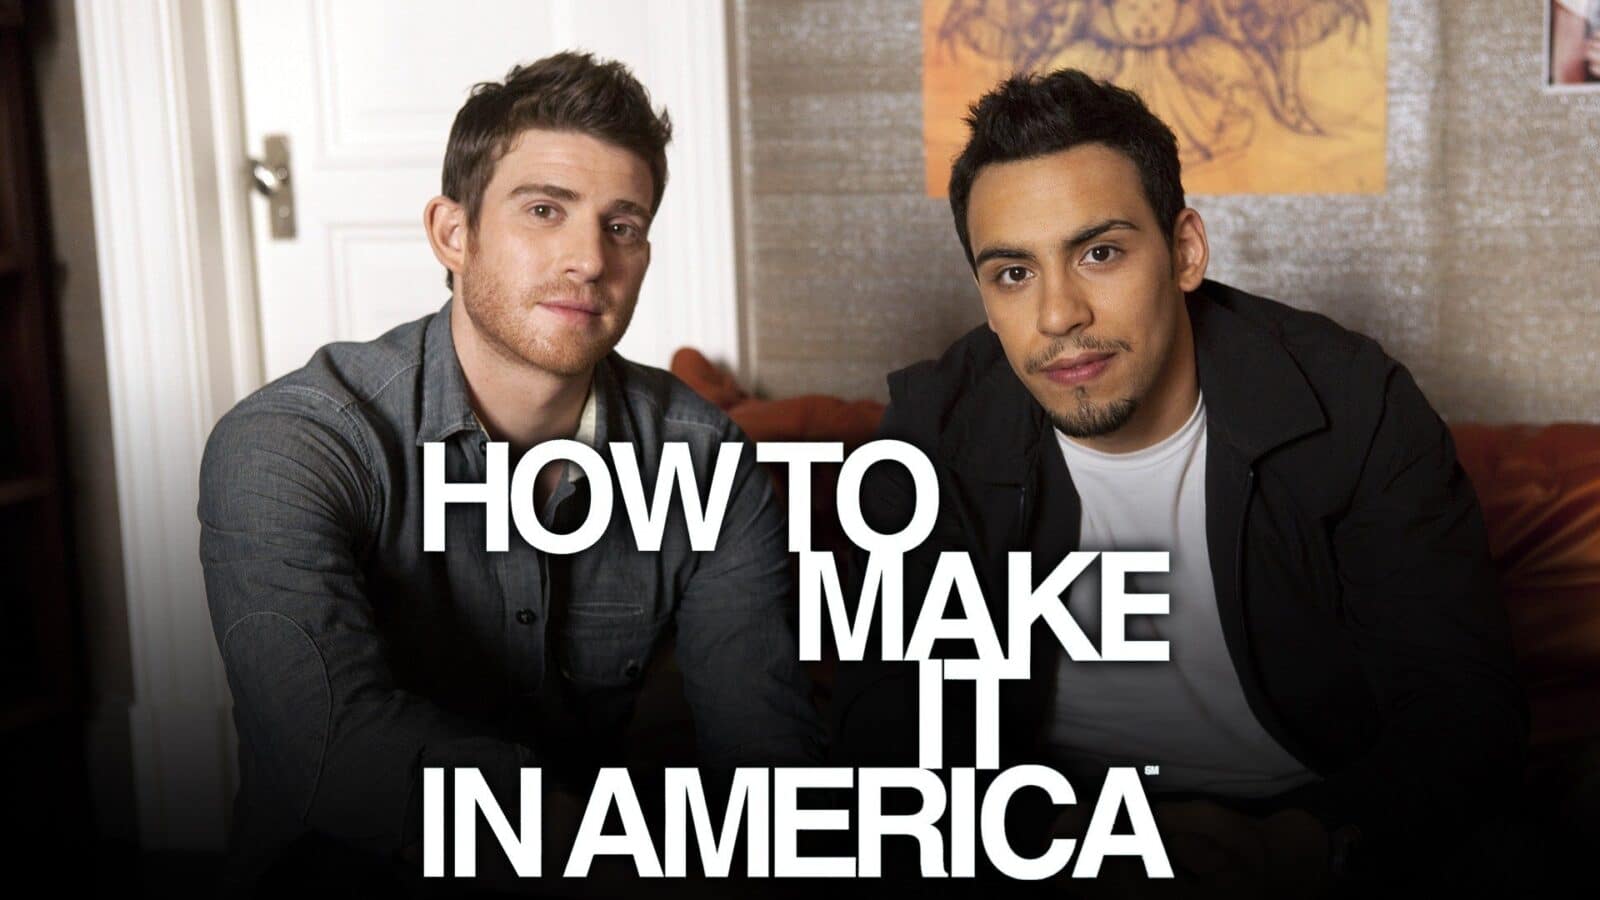 how to make it america